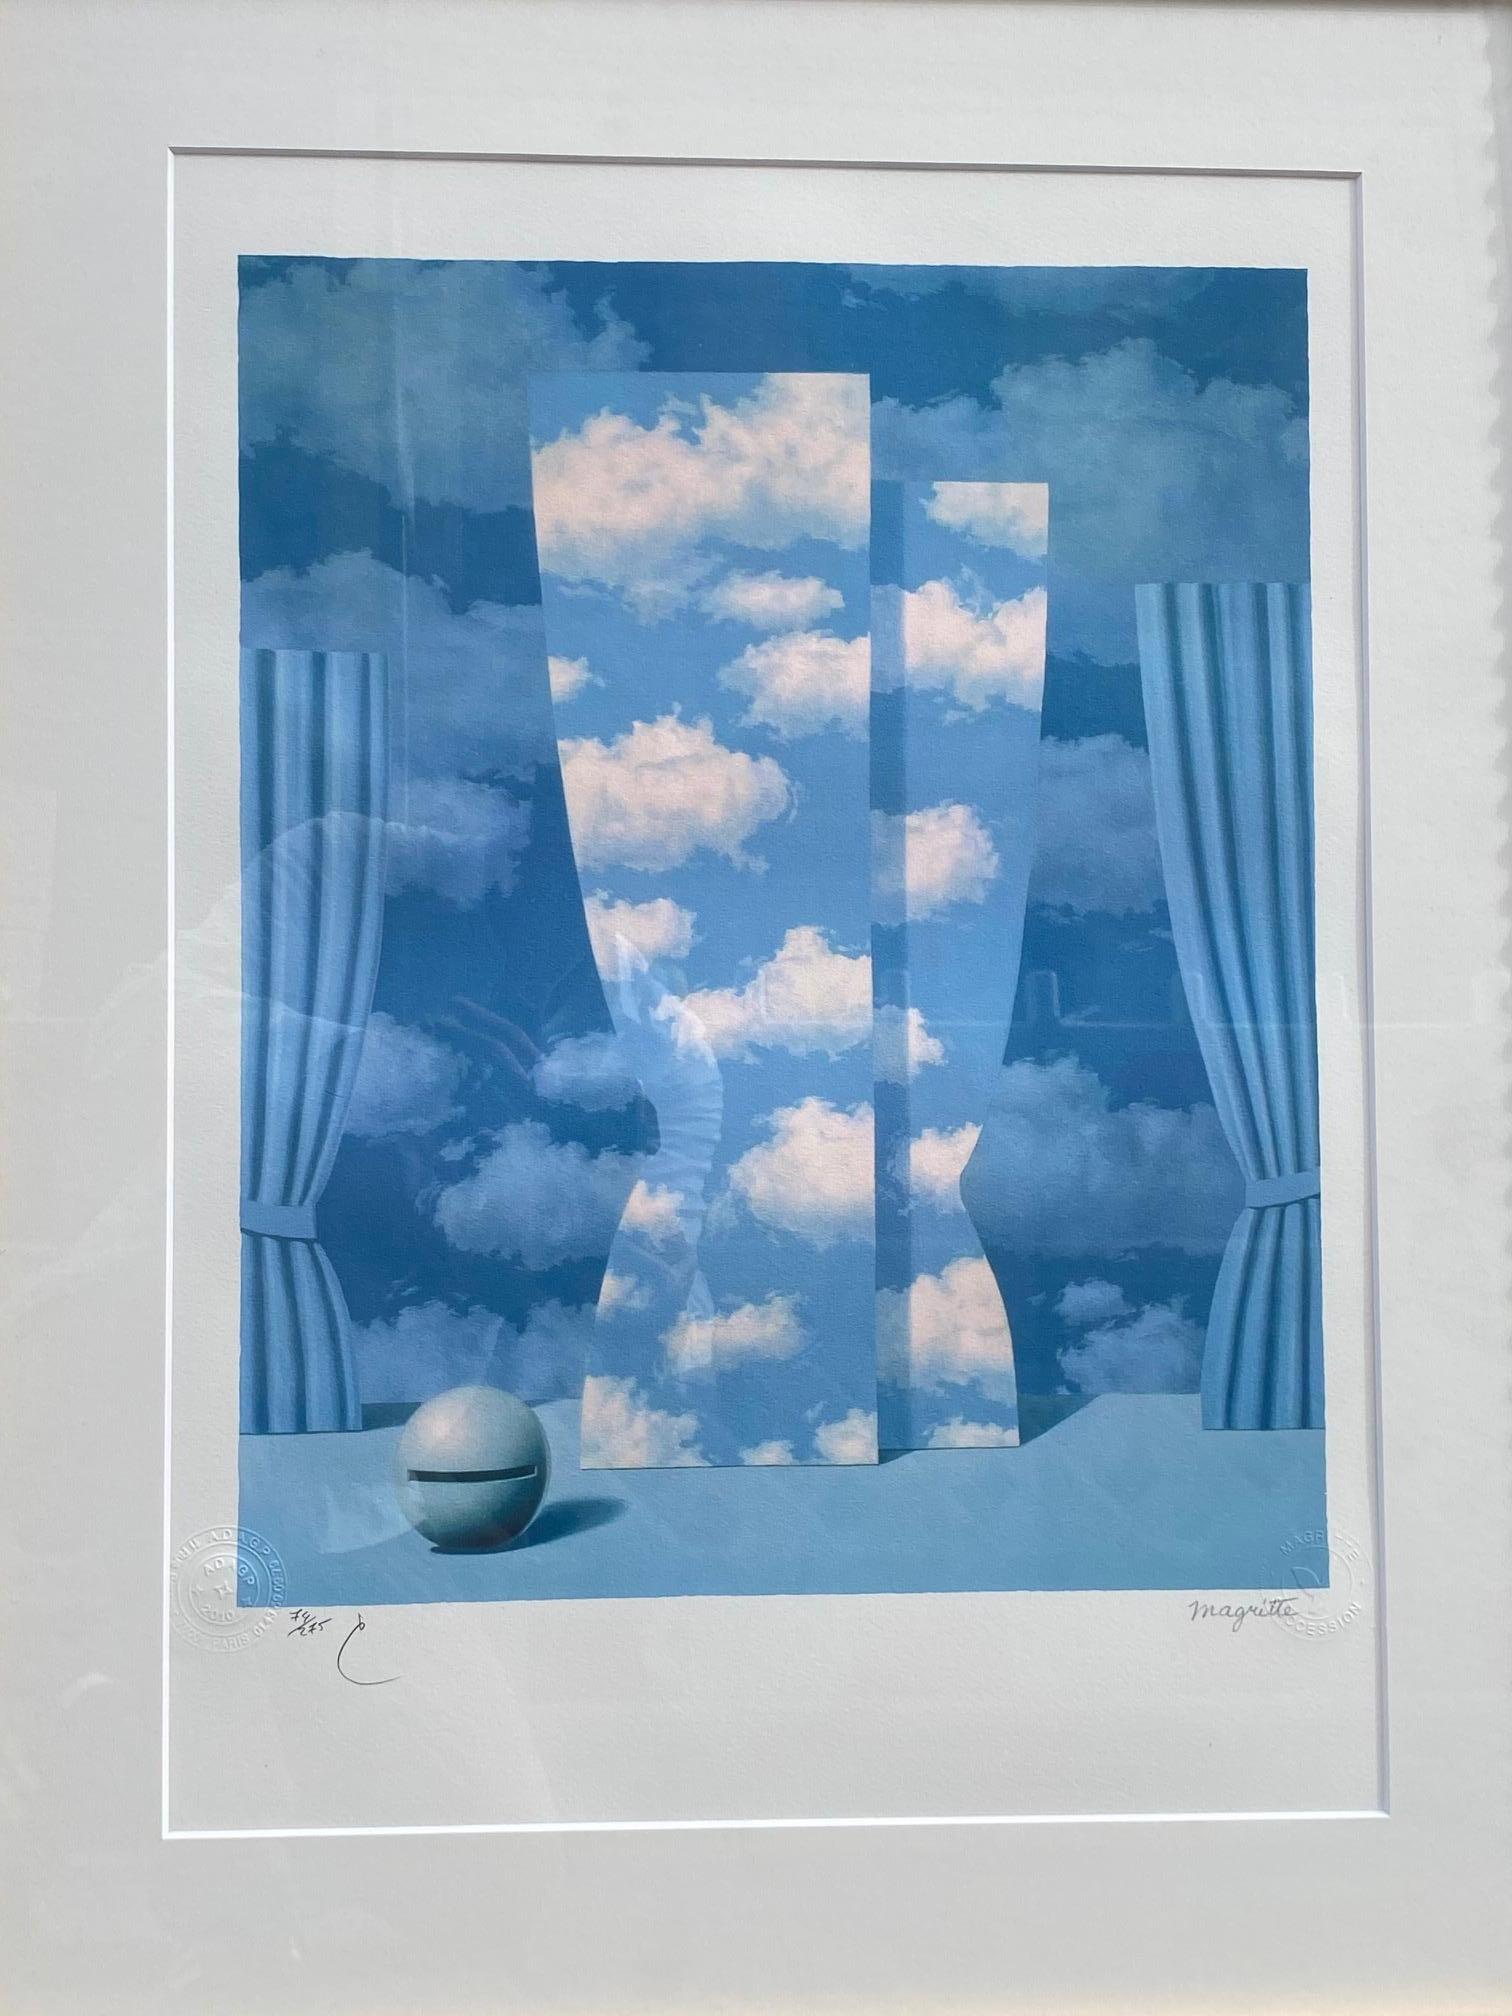 Ren�é Magritte Landscape Print - Wasted Effort - Magritte lithograph surrealistic work after his 1962 painting